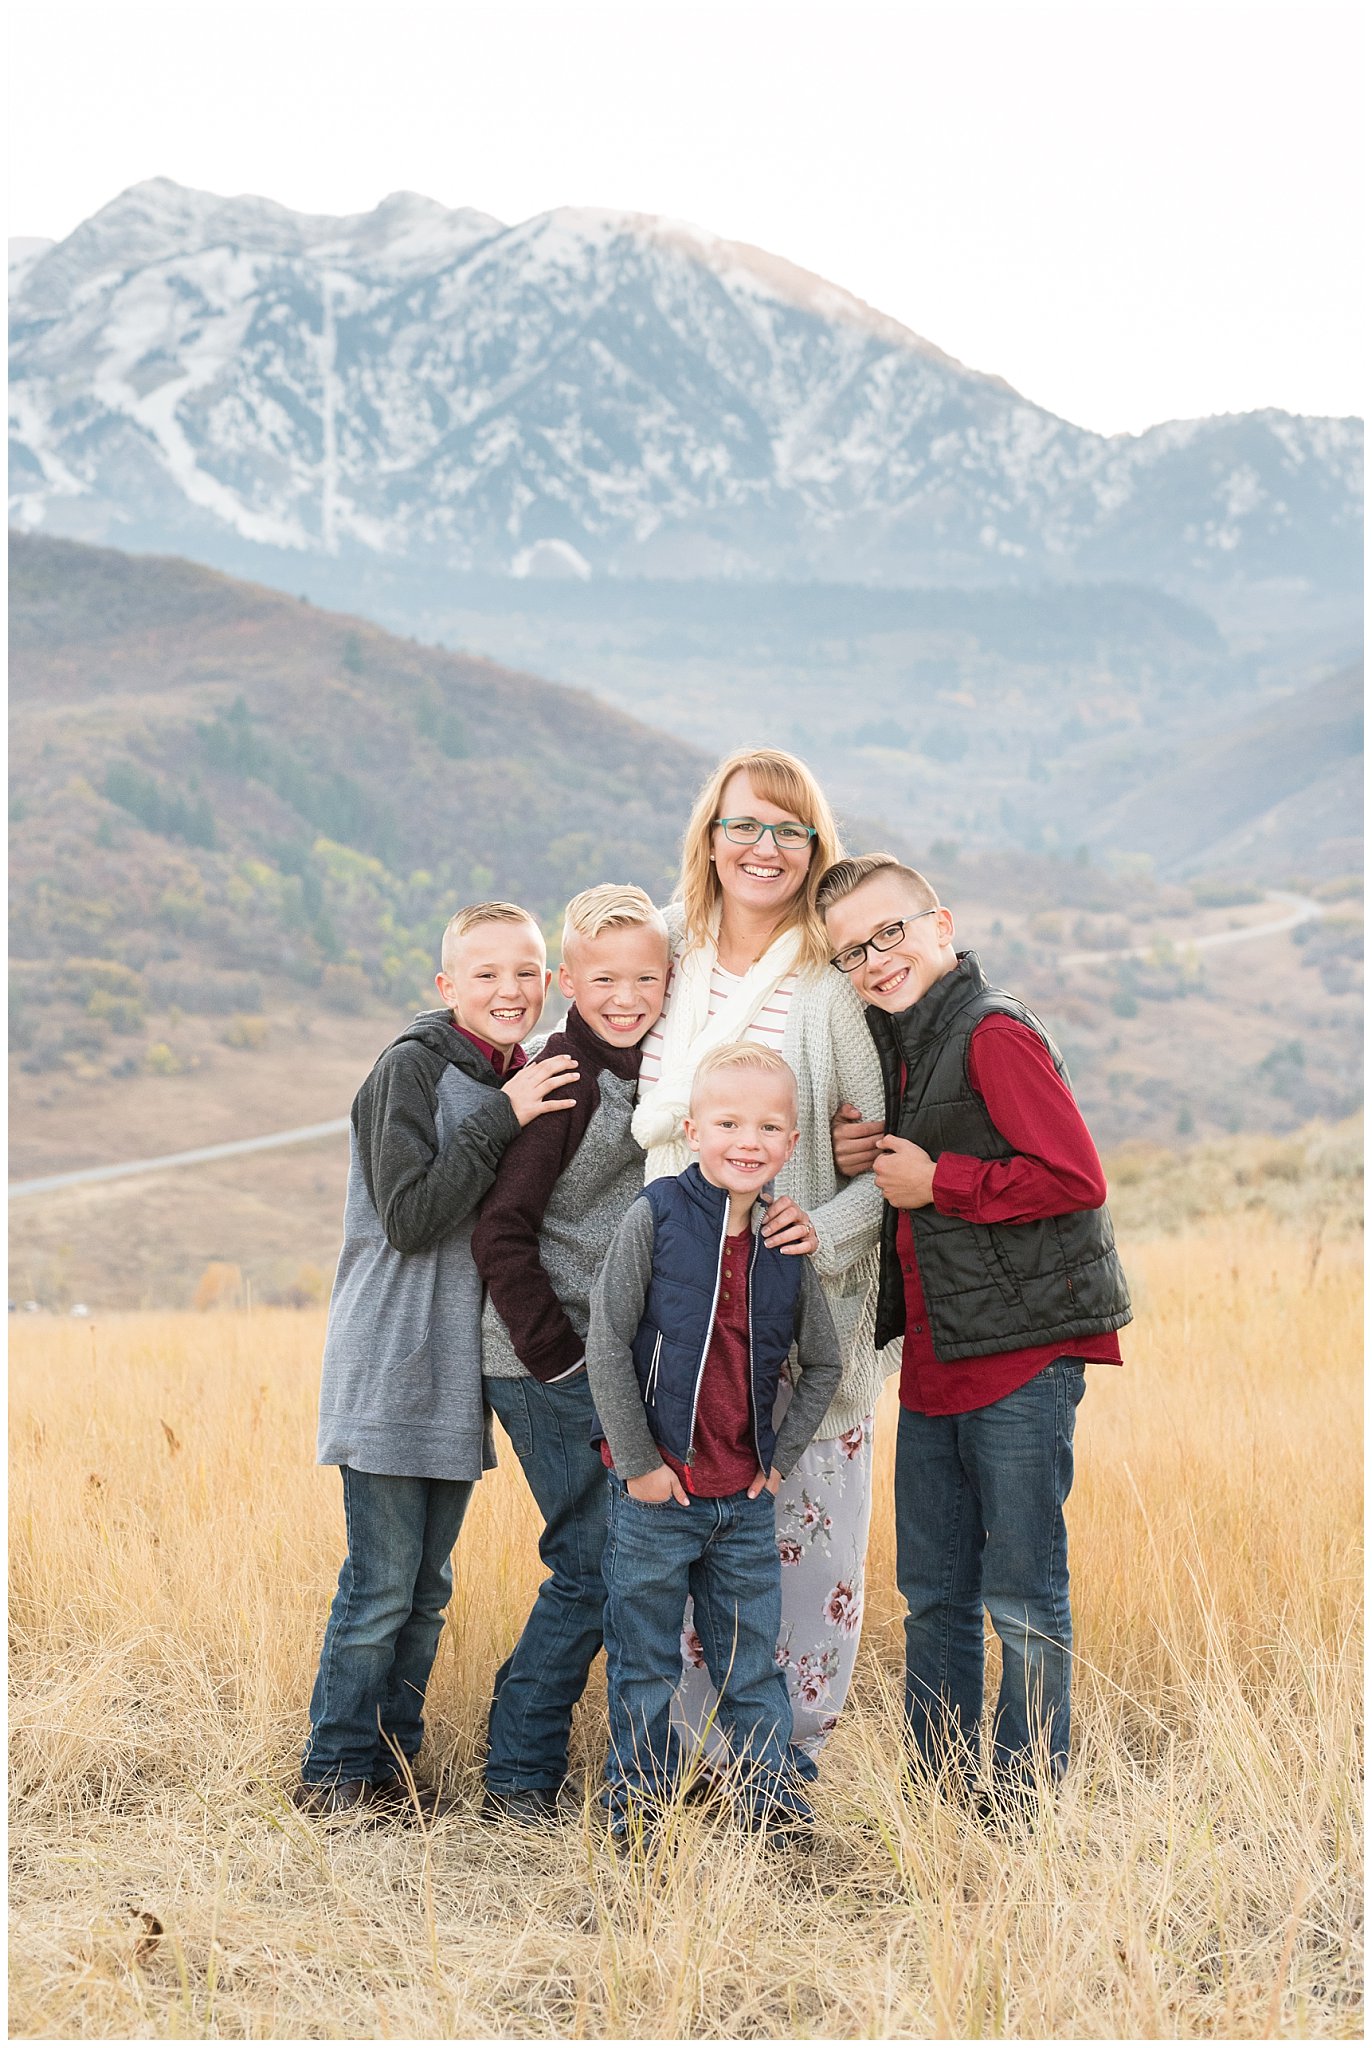 Mom and sons smiling in front of snowy mountains | Fall Family Pictures in the Mountains | Snowbasin, Utah | Jessie and Dallin Photography